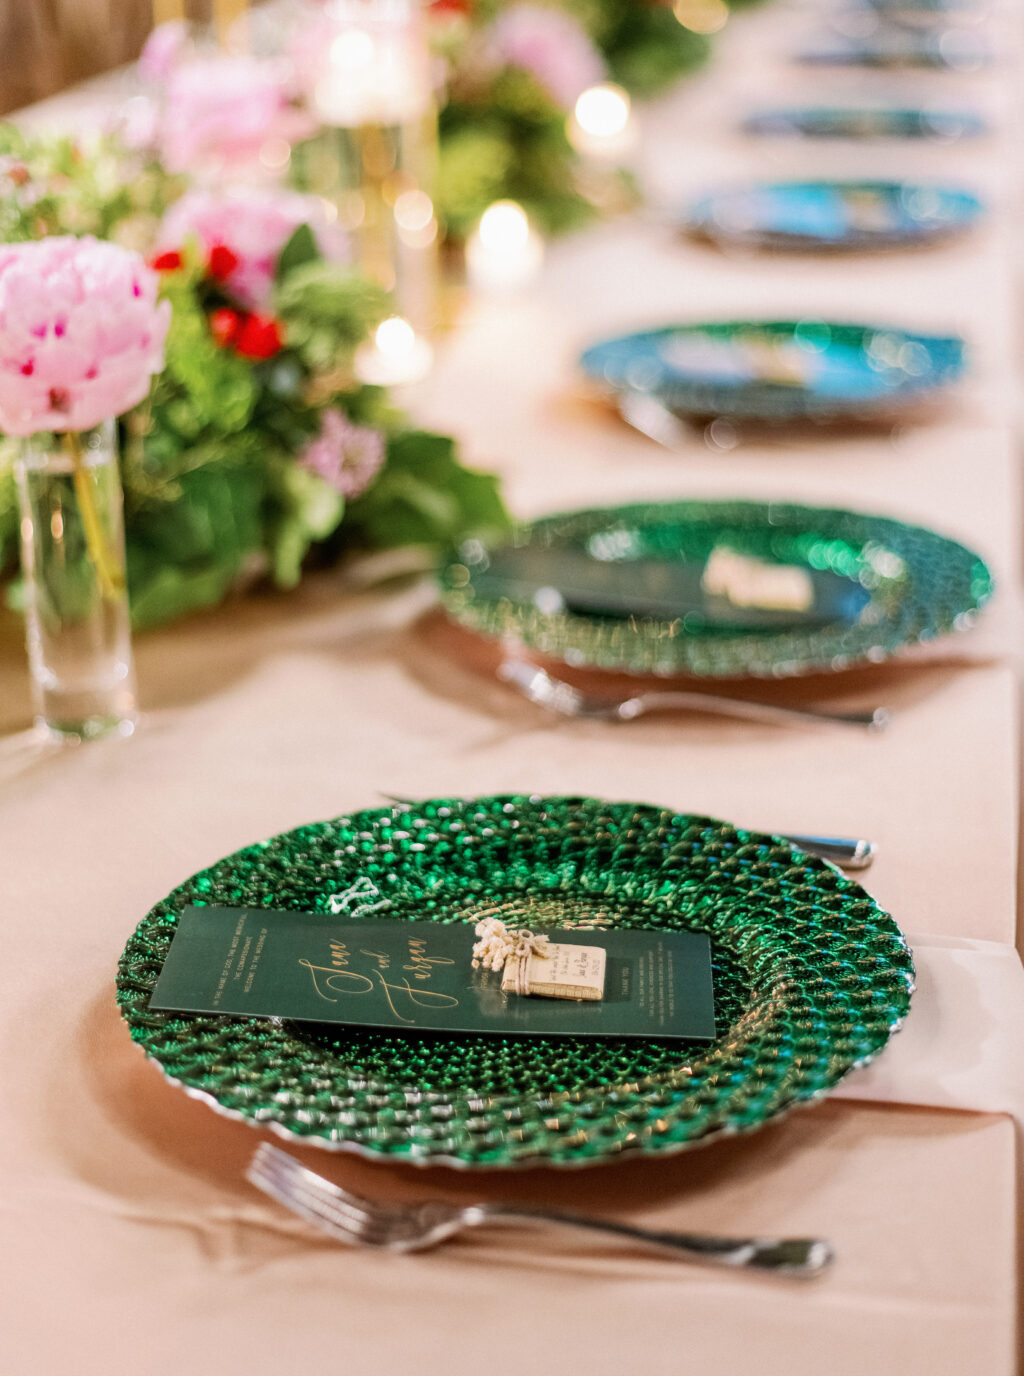 Emerald Green Wedding Guest Thank You Cards on Pineapple Textured Chargers Reception Tablescape | Tampa Bay Rental Company A Chair Affair